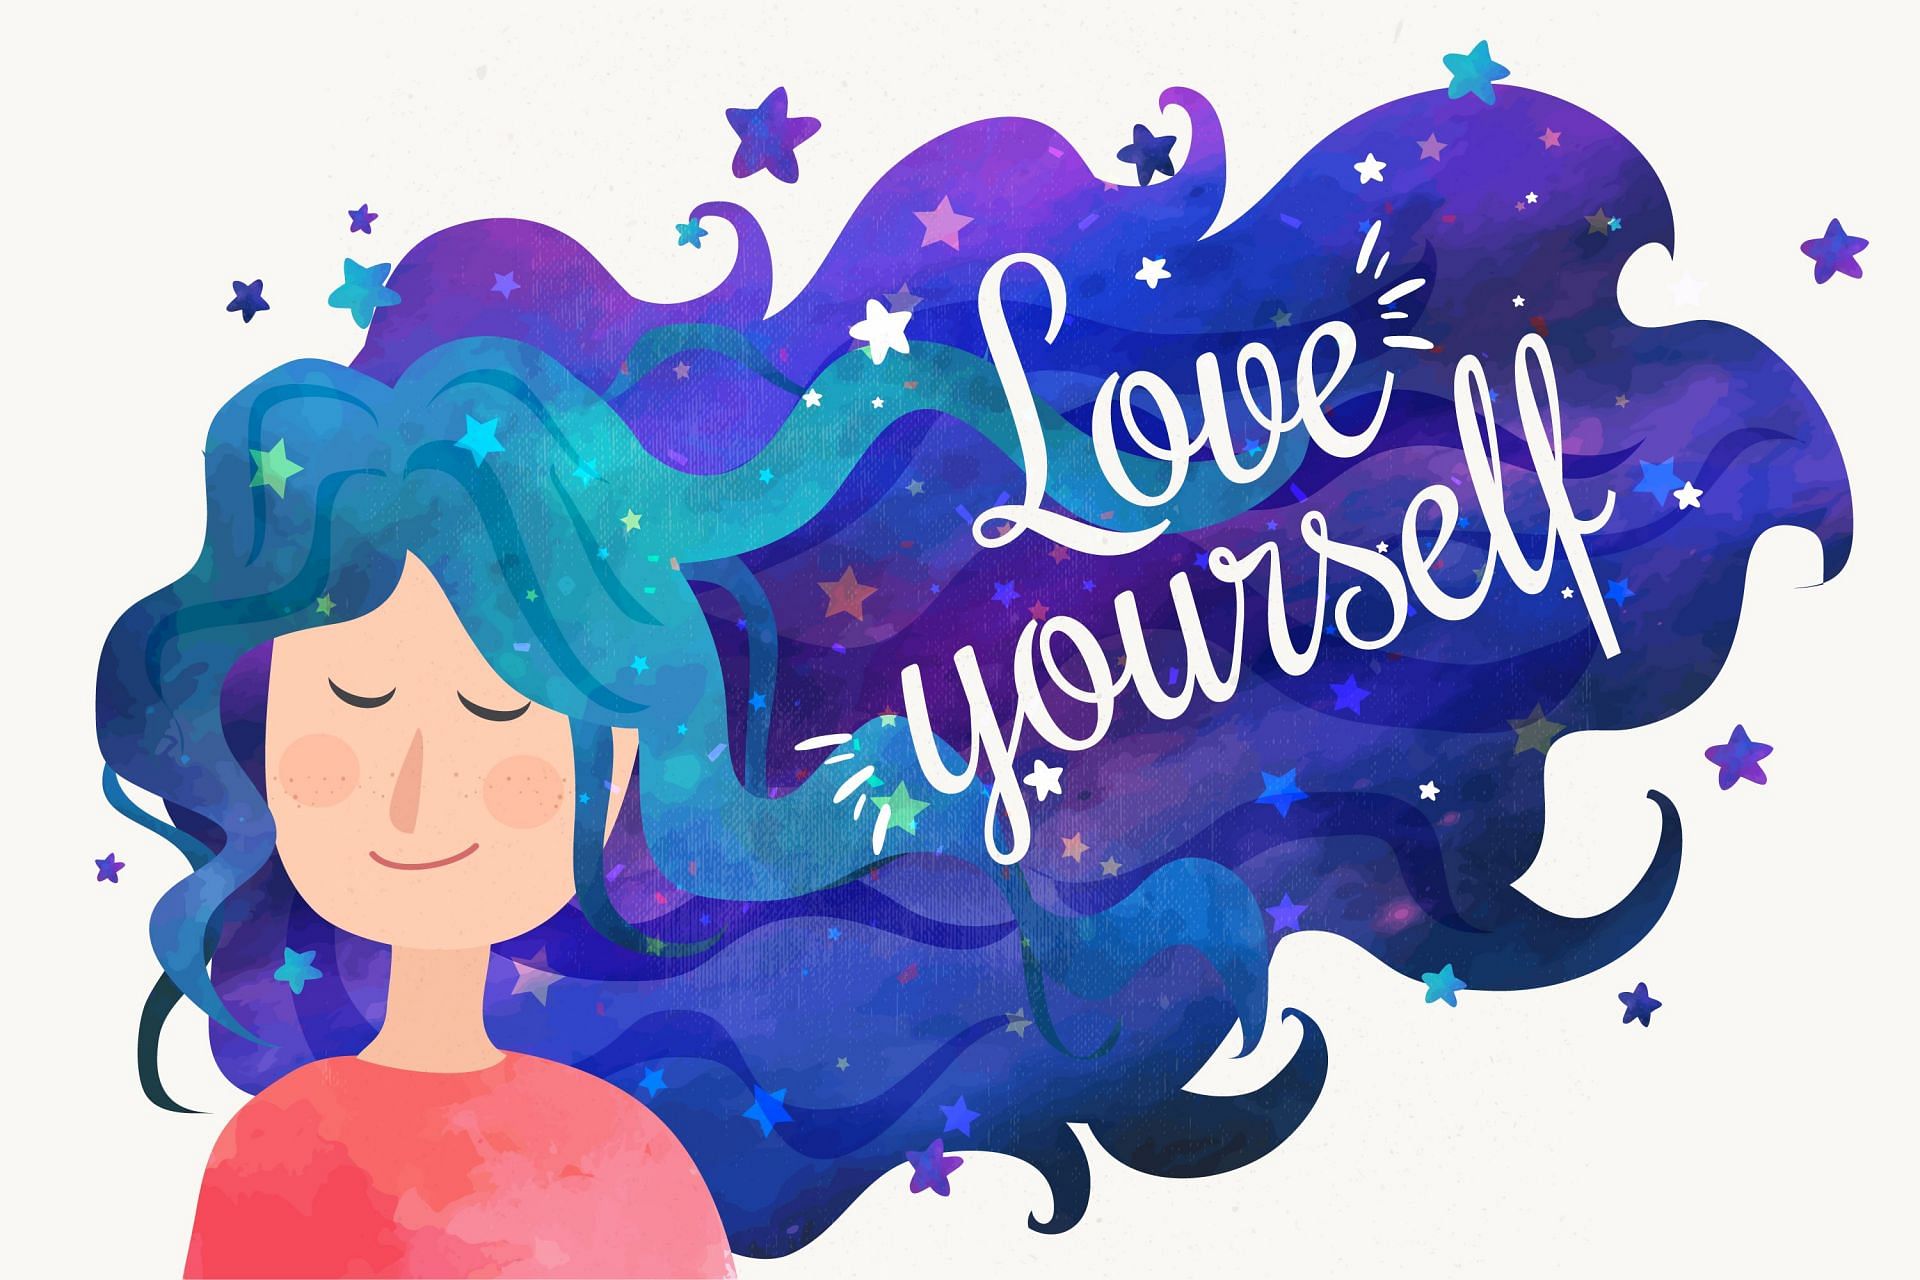 In an attempt to love yourself, you may find a connection to your emotions. (Image via Freepik/ Freepik)